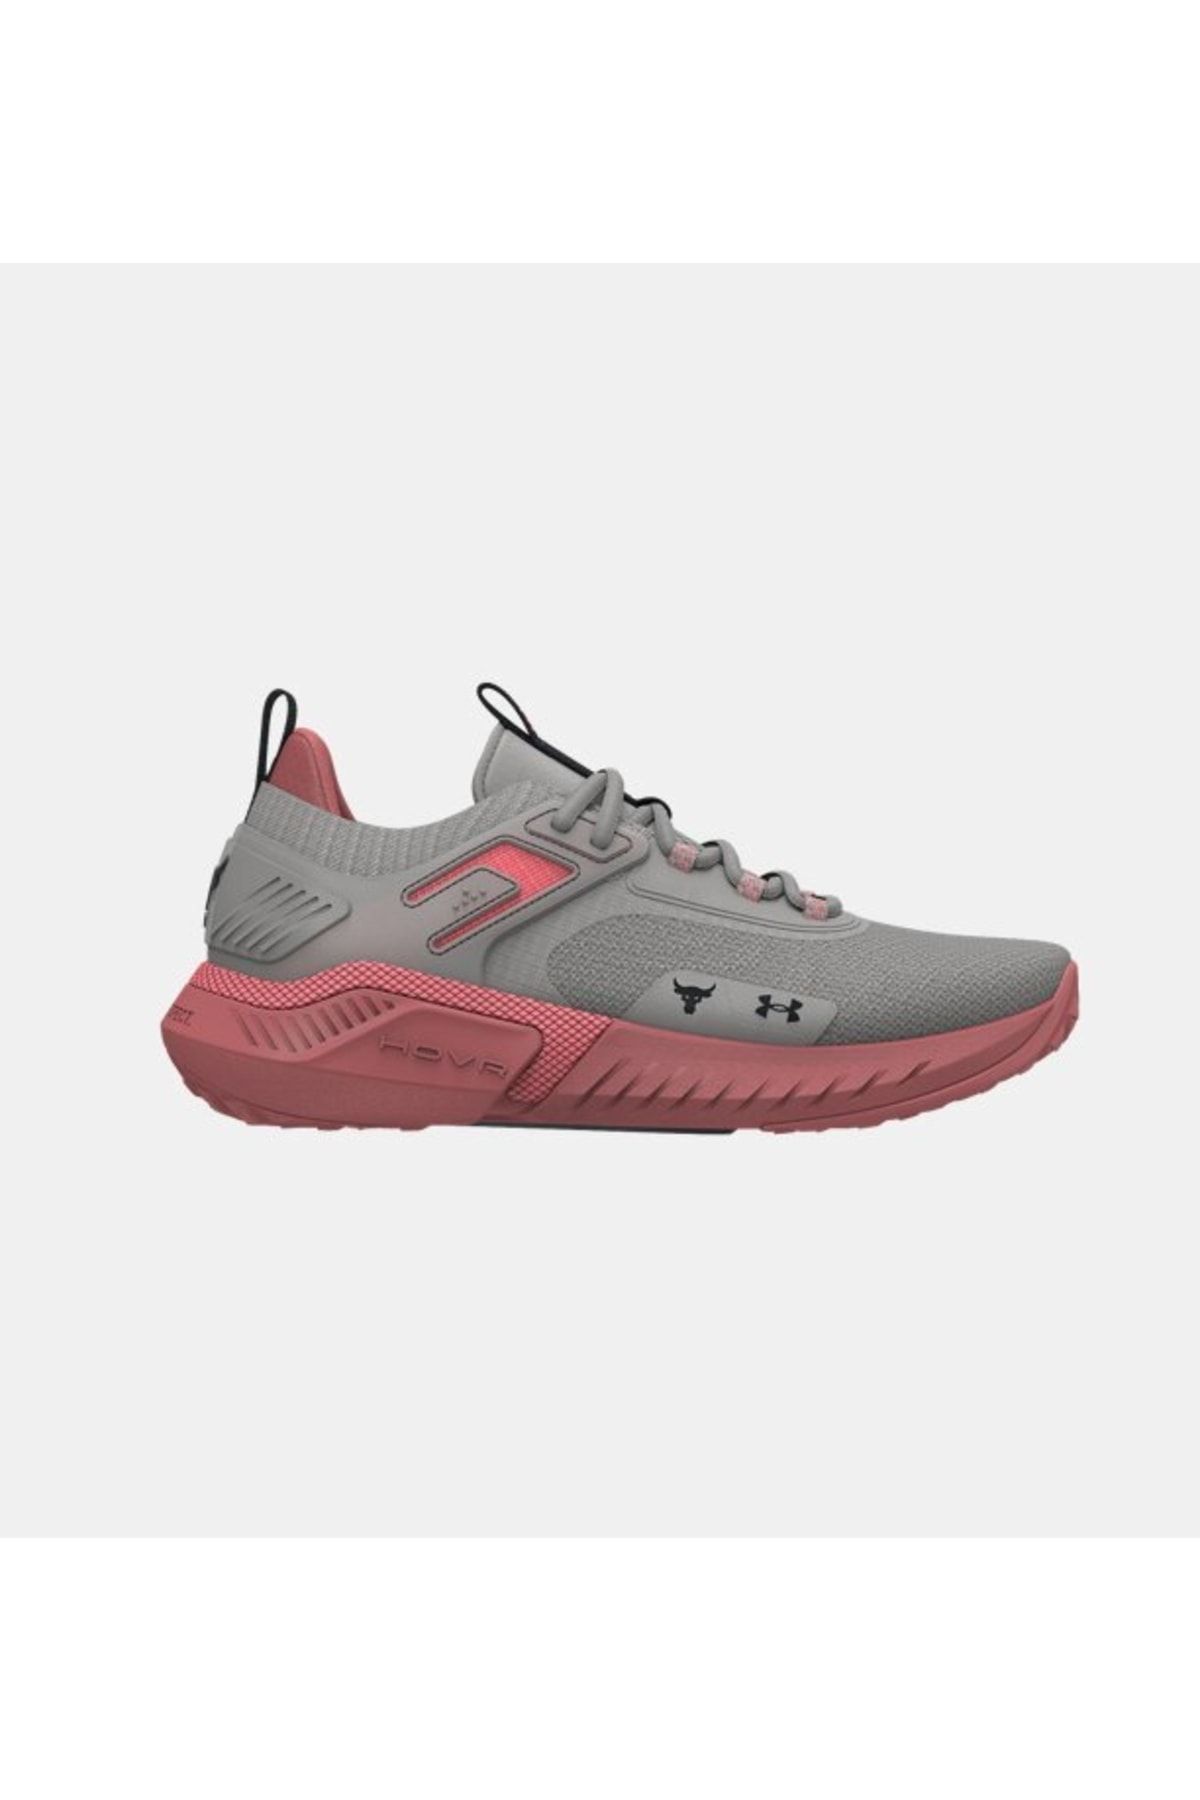 Under Armour Women's Project Rock 5 Home Gym Training Shoes - Trendyol